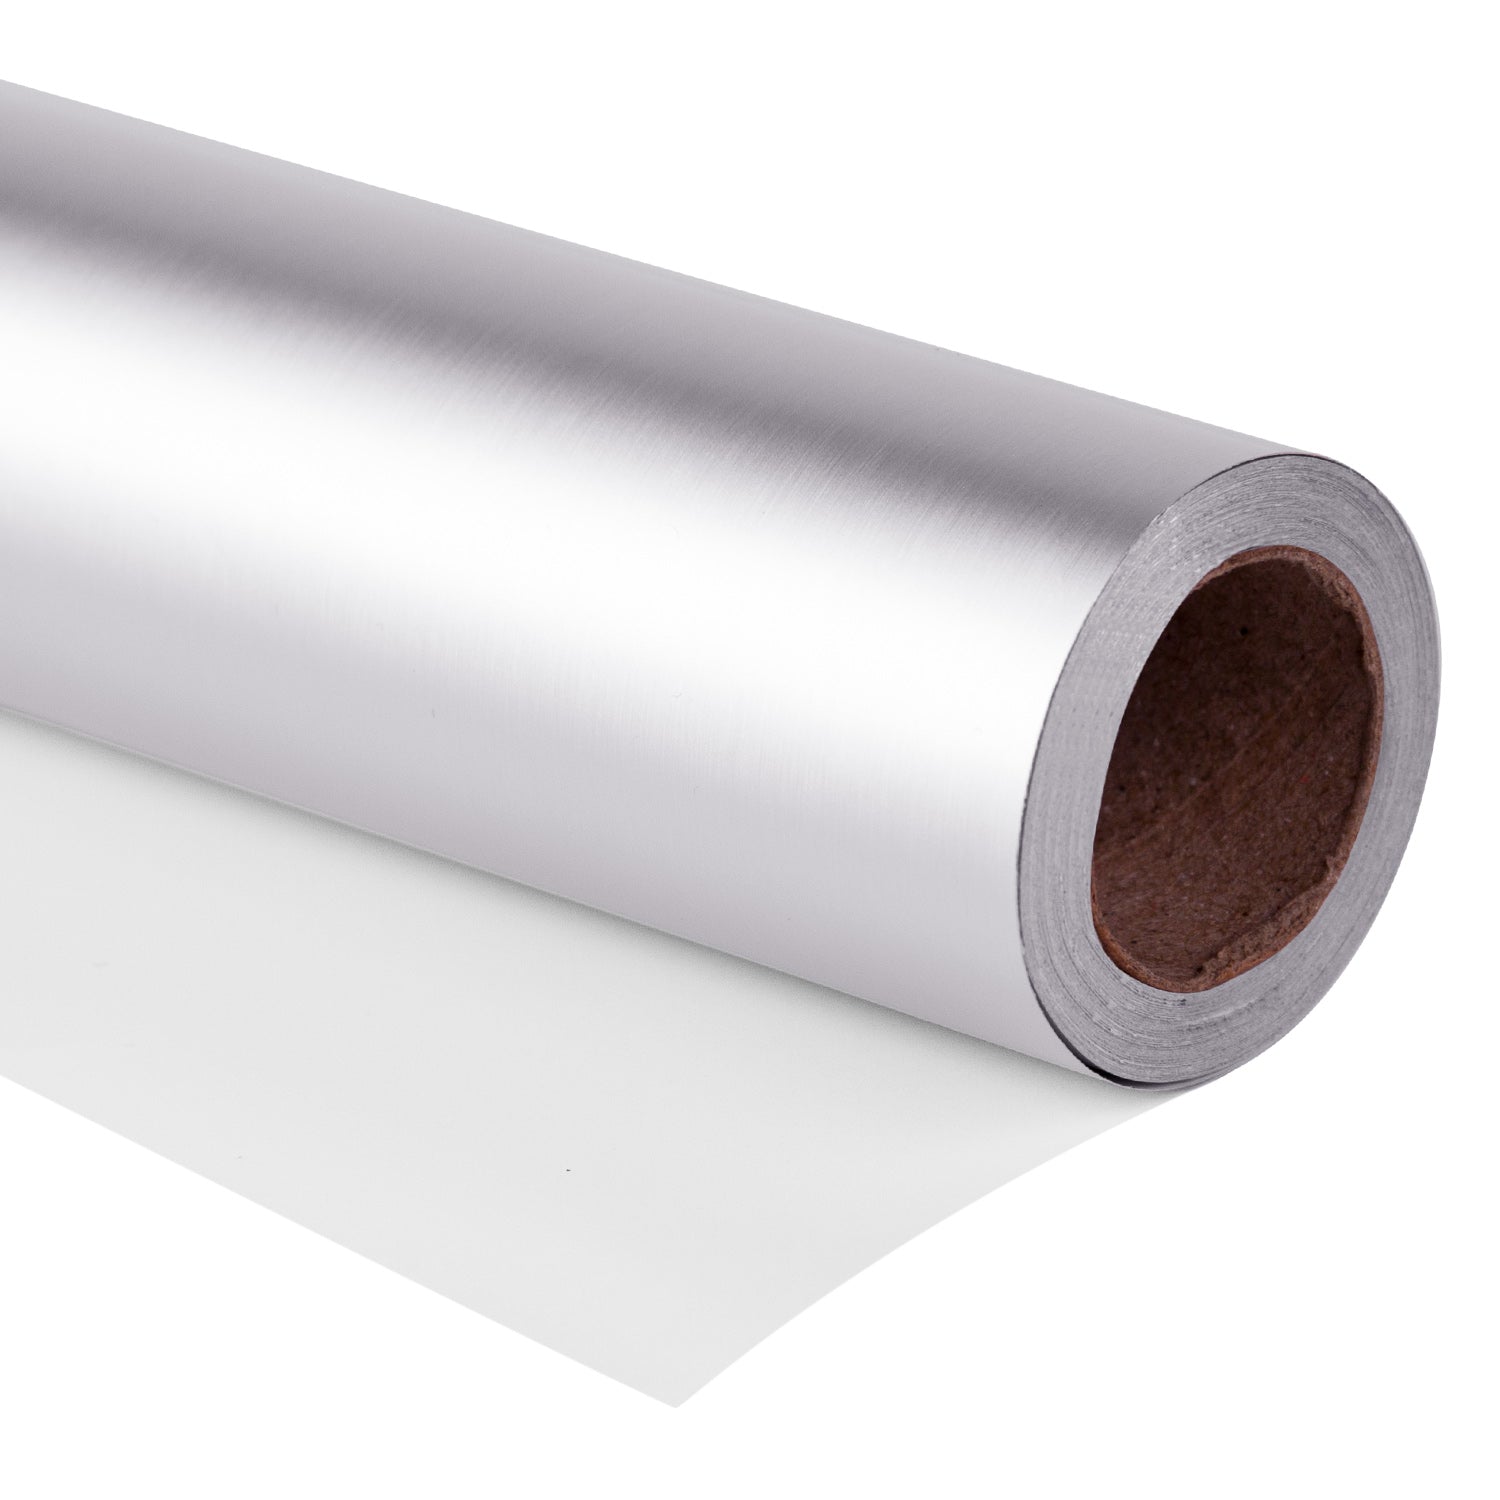 Matte Metallic Wrapping Paper Roll Silver Ream Wholesale Wrapaholic